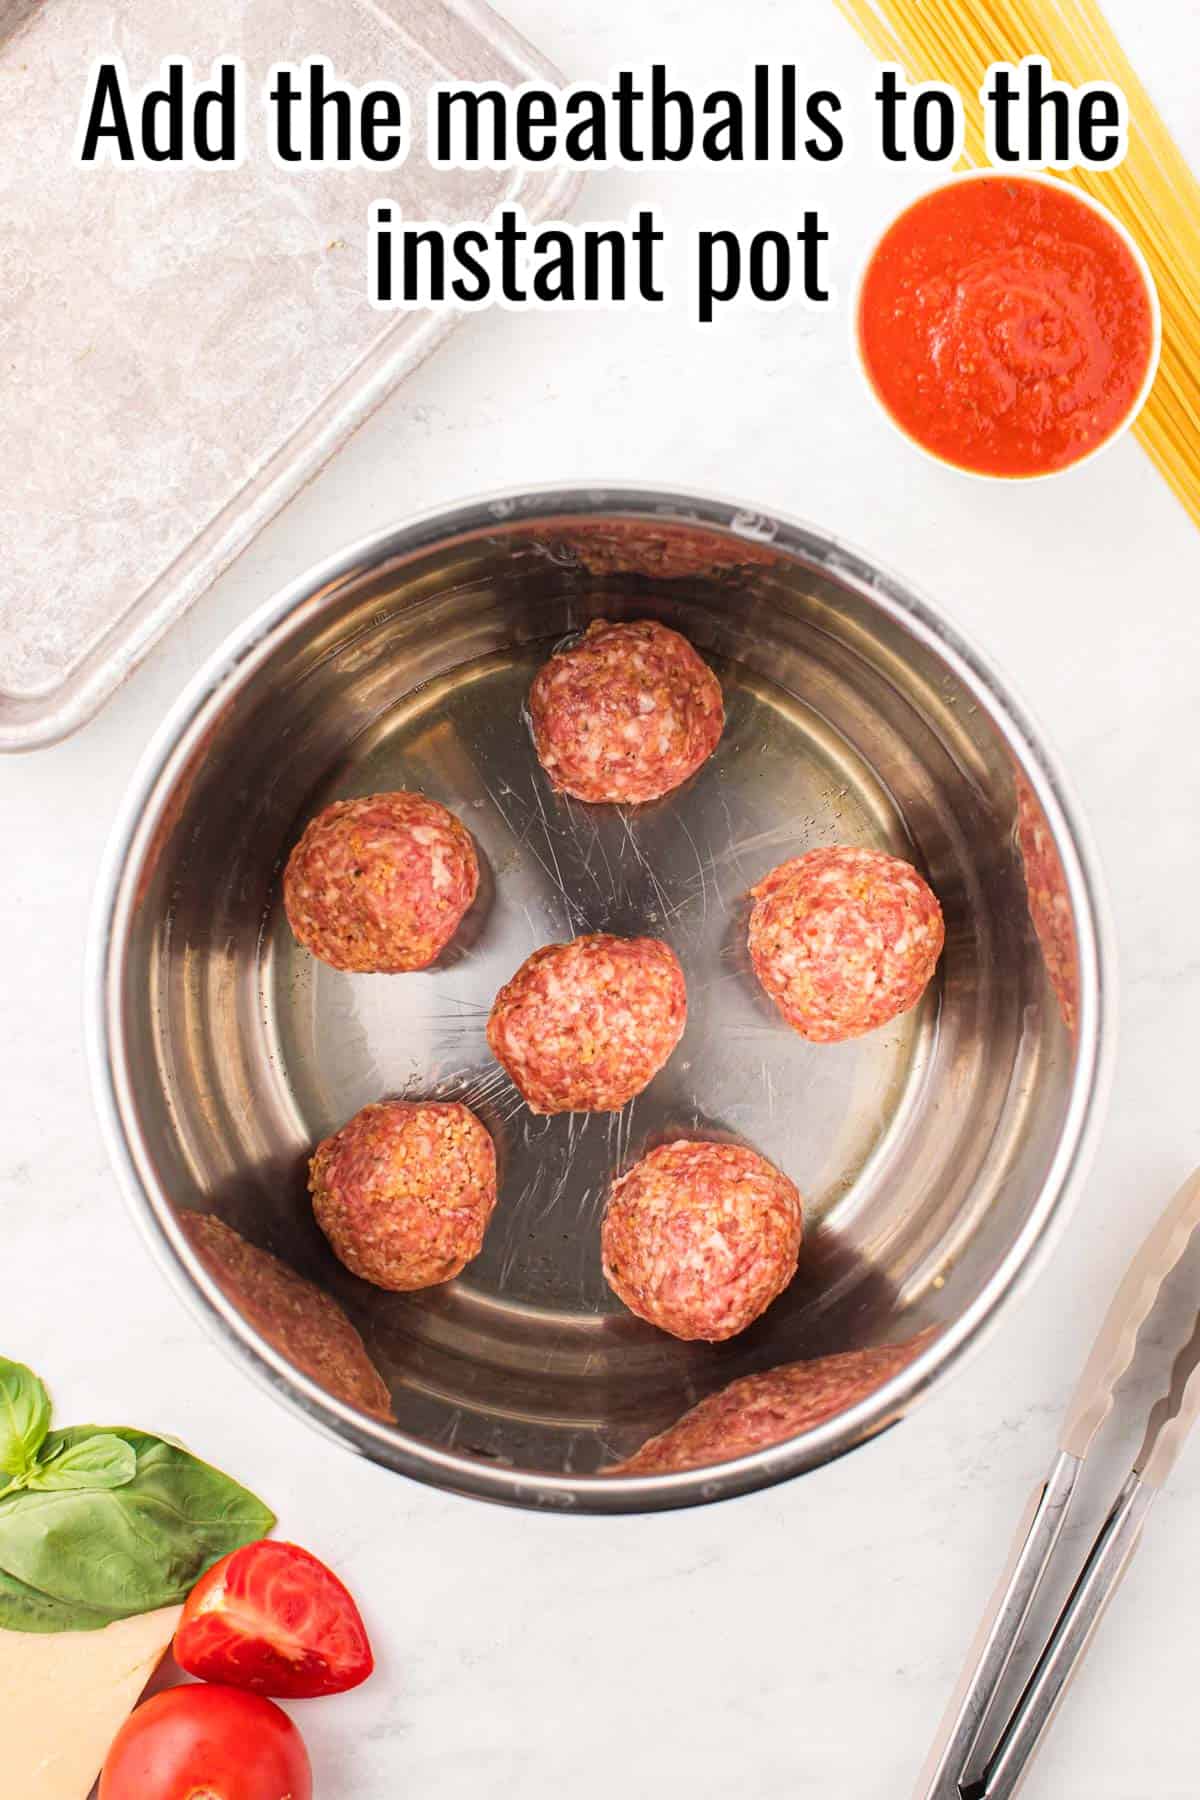 six meatballs in an instant pot, uncooked.